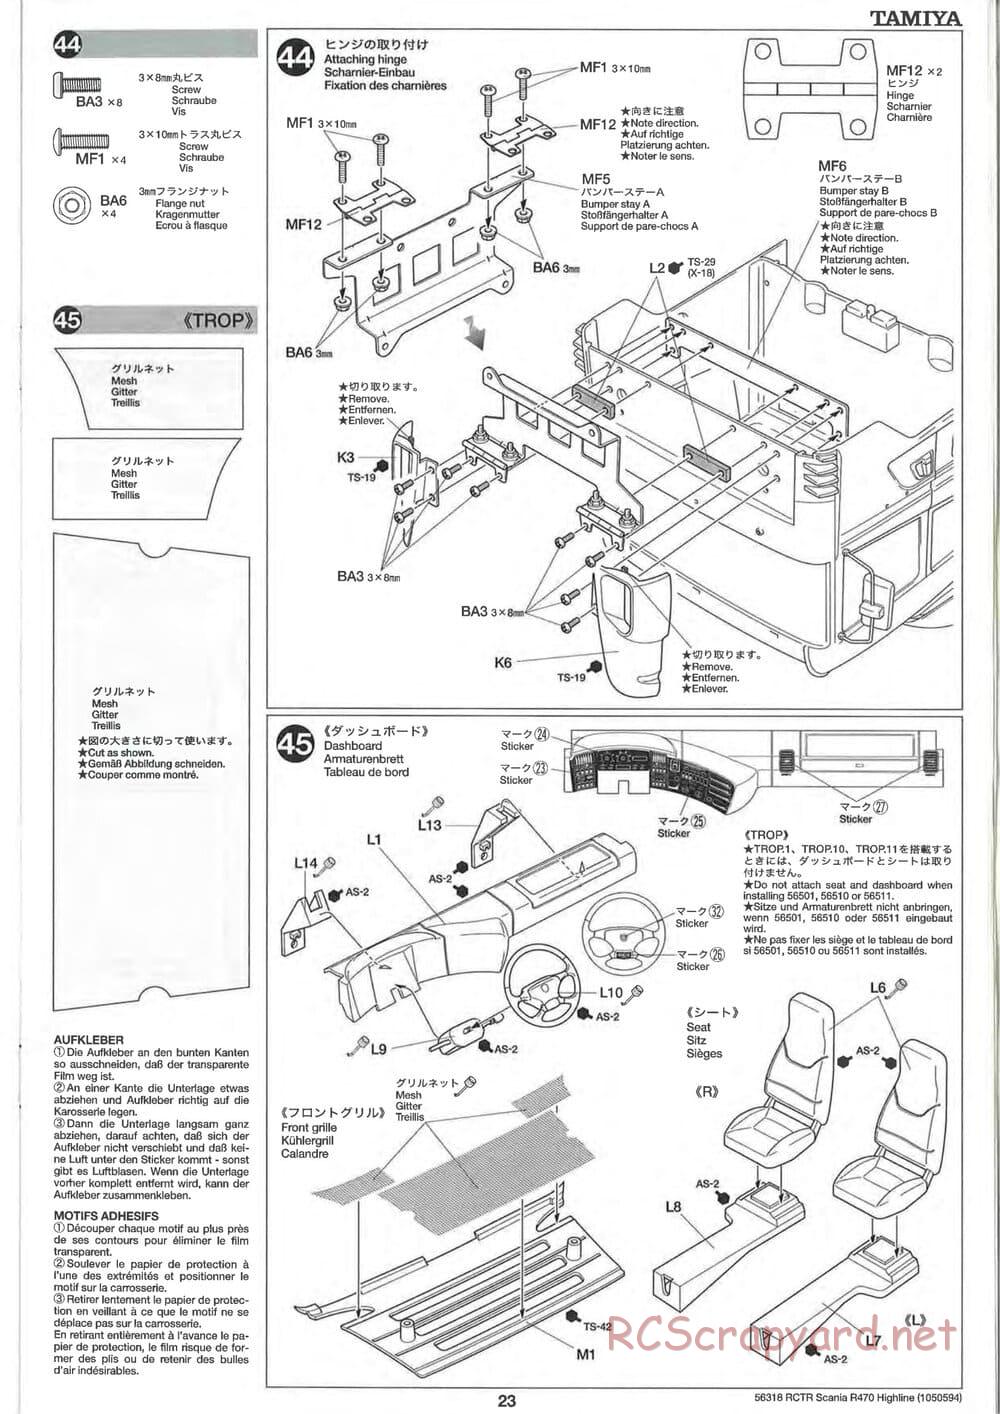 Tamiya - Scania R470 Highline Tractor Truck Chassis - Manual - Page 23